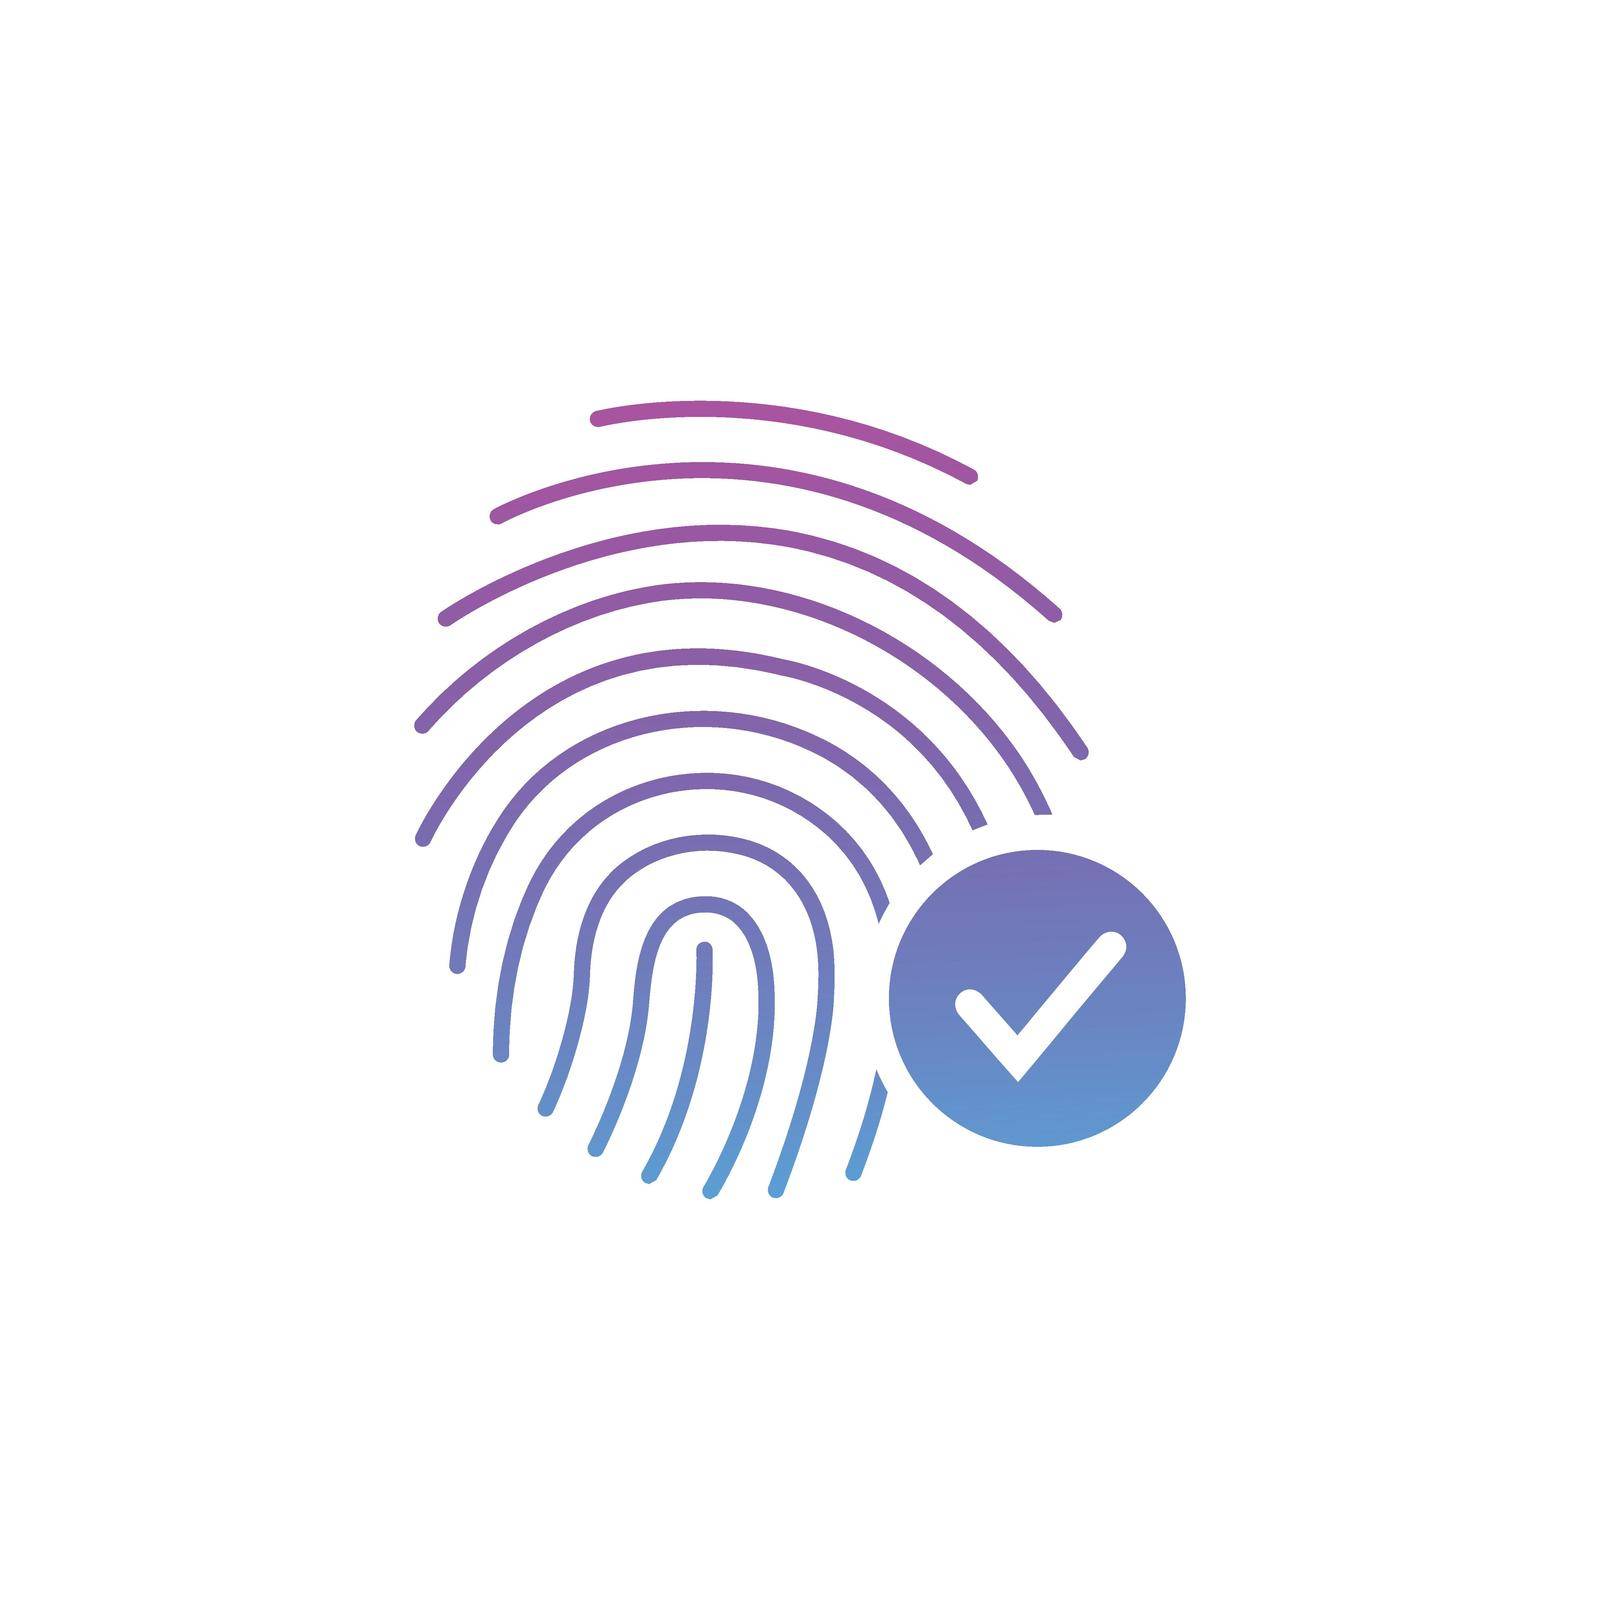 Fingerprint Success Icon, thumbprint with checkmark. vector illustration isolated on white